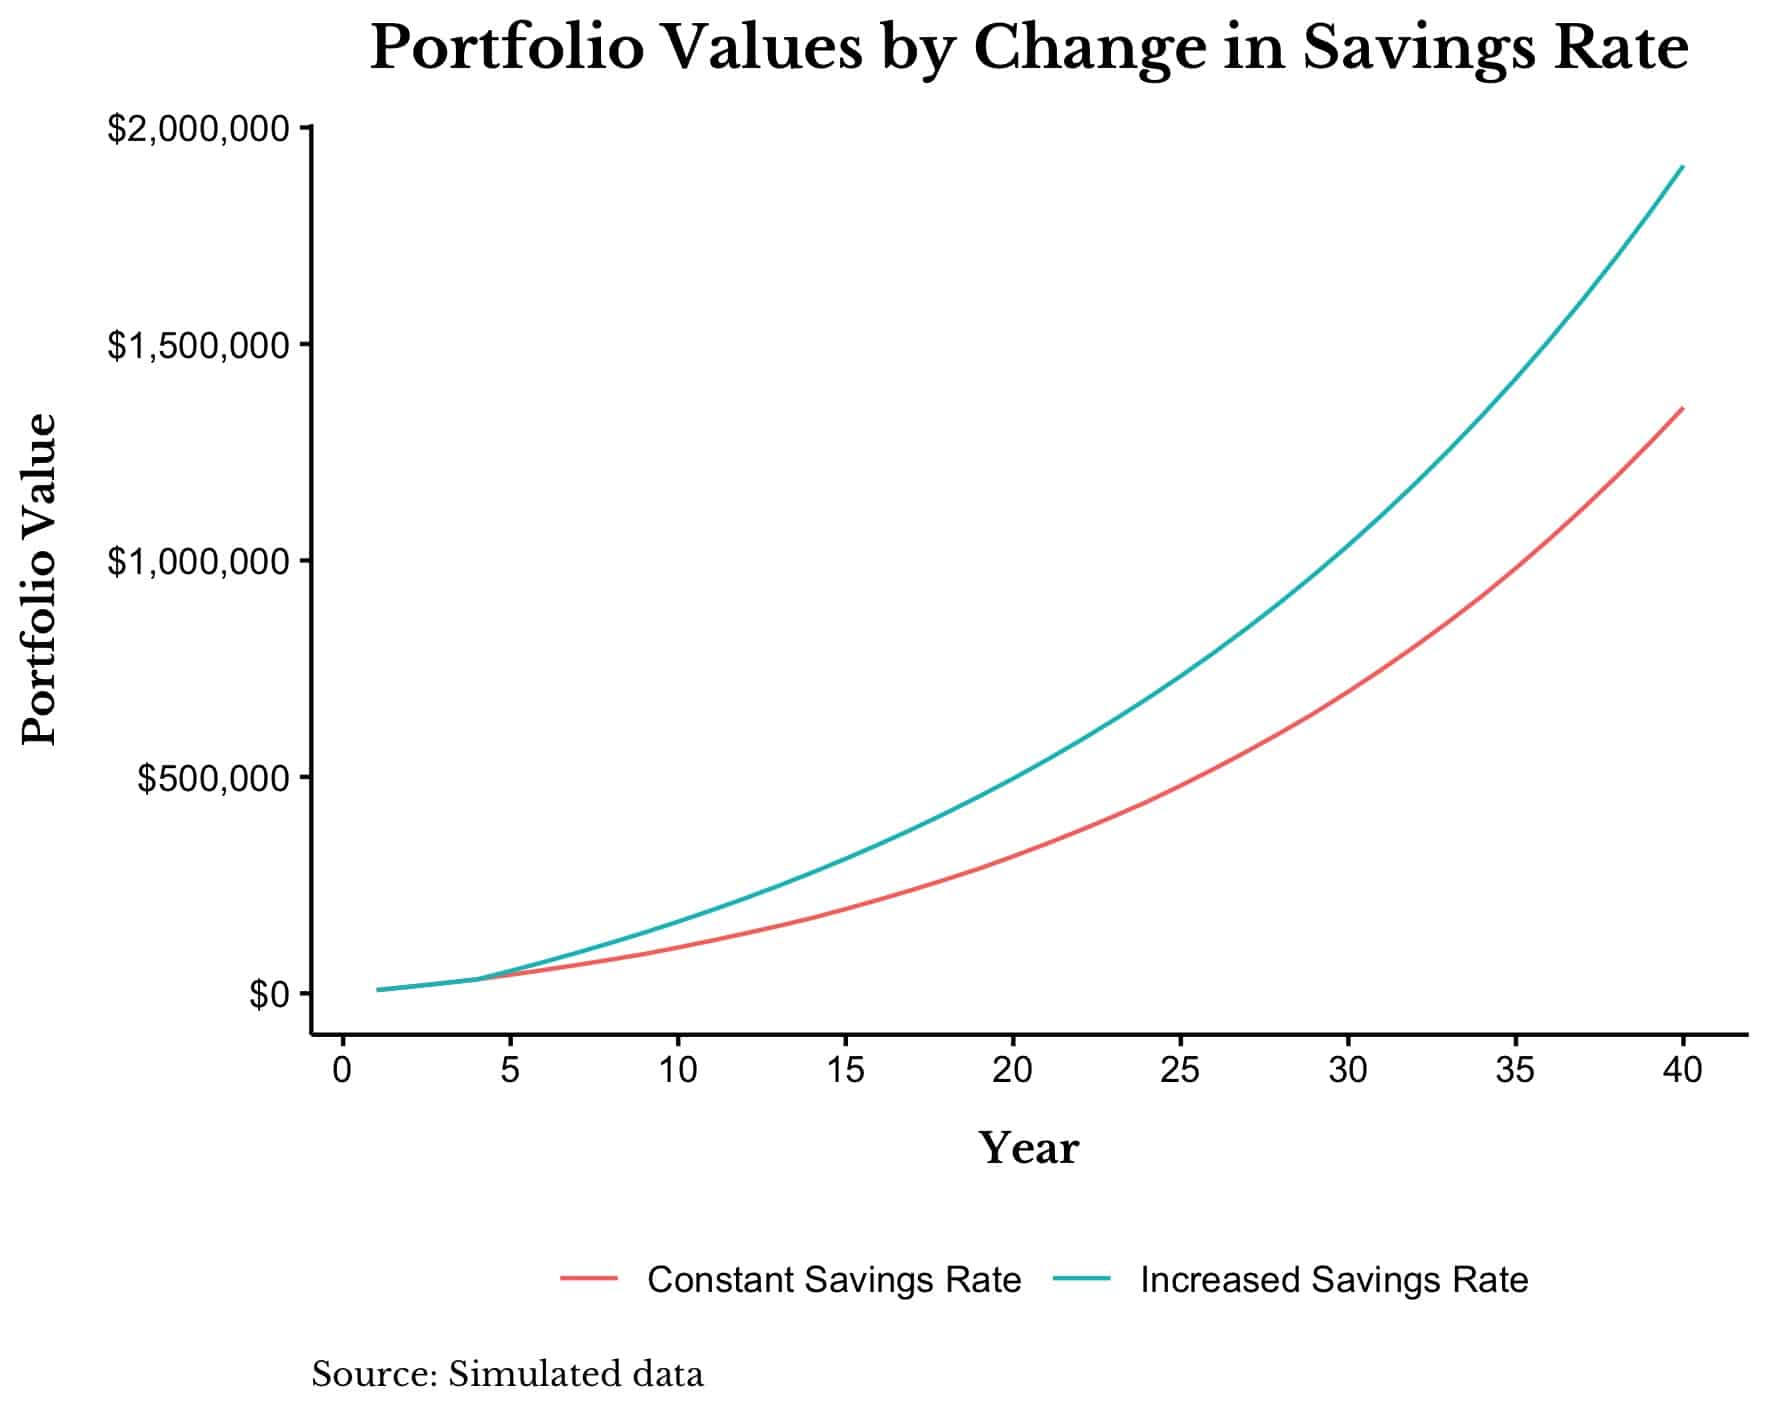 Portfolio values by change in savings rate